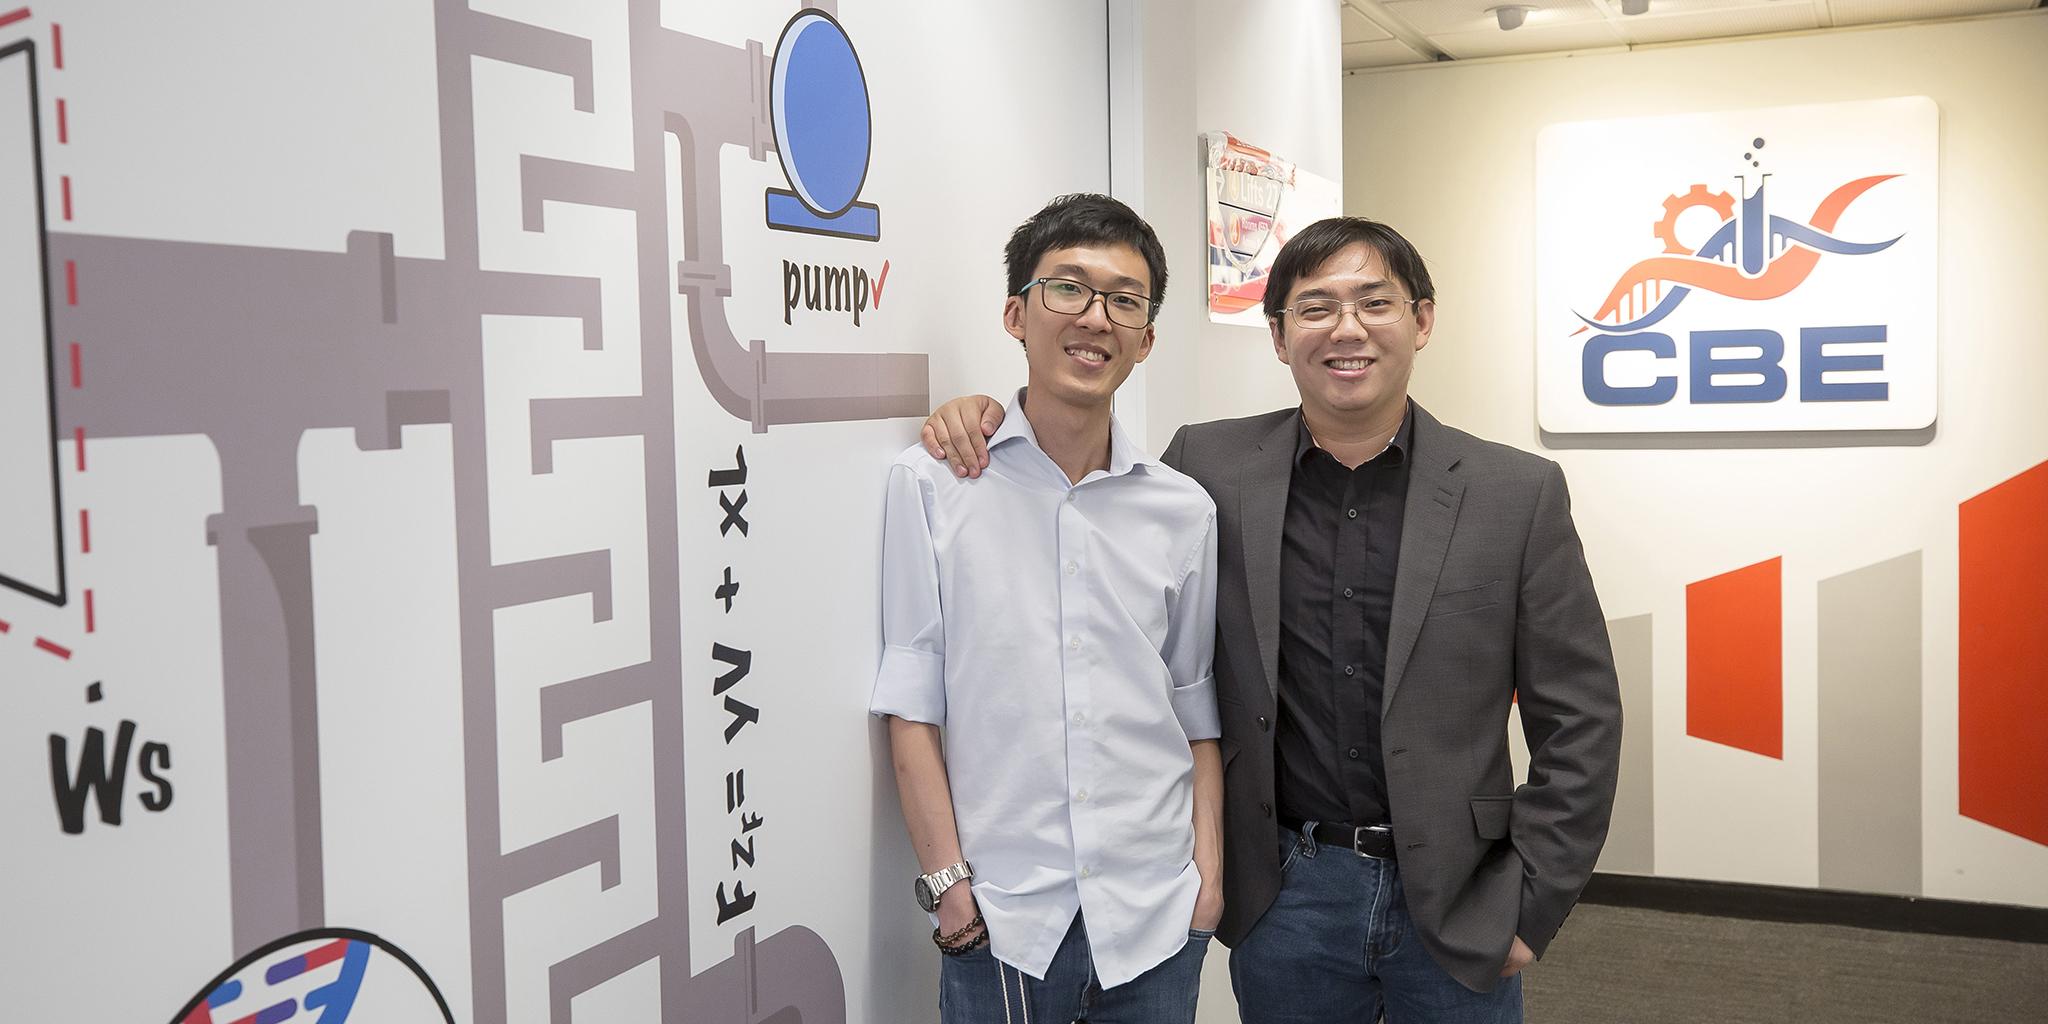 (From right) HKUST alumni Donald LAI and Winsor LEE, who earned Bachelor’s degrees from the Department of Chemical and Biological Engineering and worked on research projects at the University, joined the same company after graduation where they continue to further their research and apply their engineering knowledge, which in turn has contributed to society during the COVID-19 pandemic. 